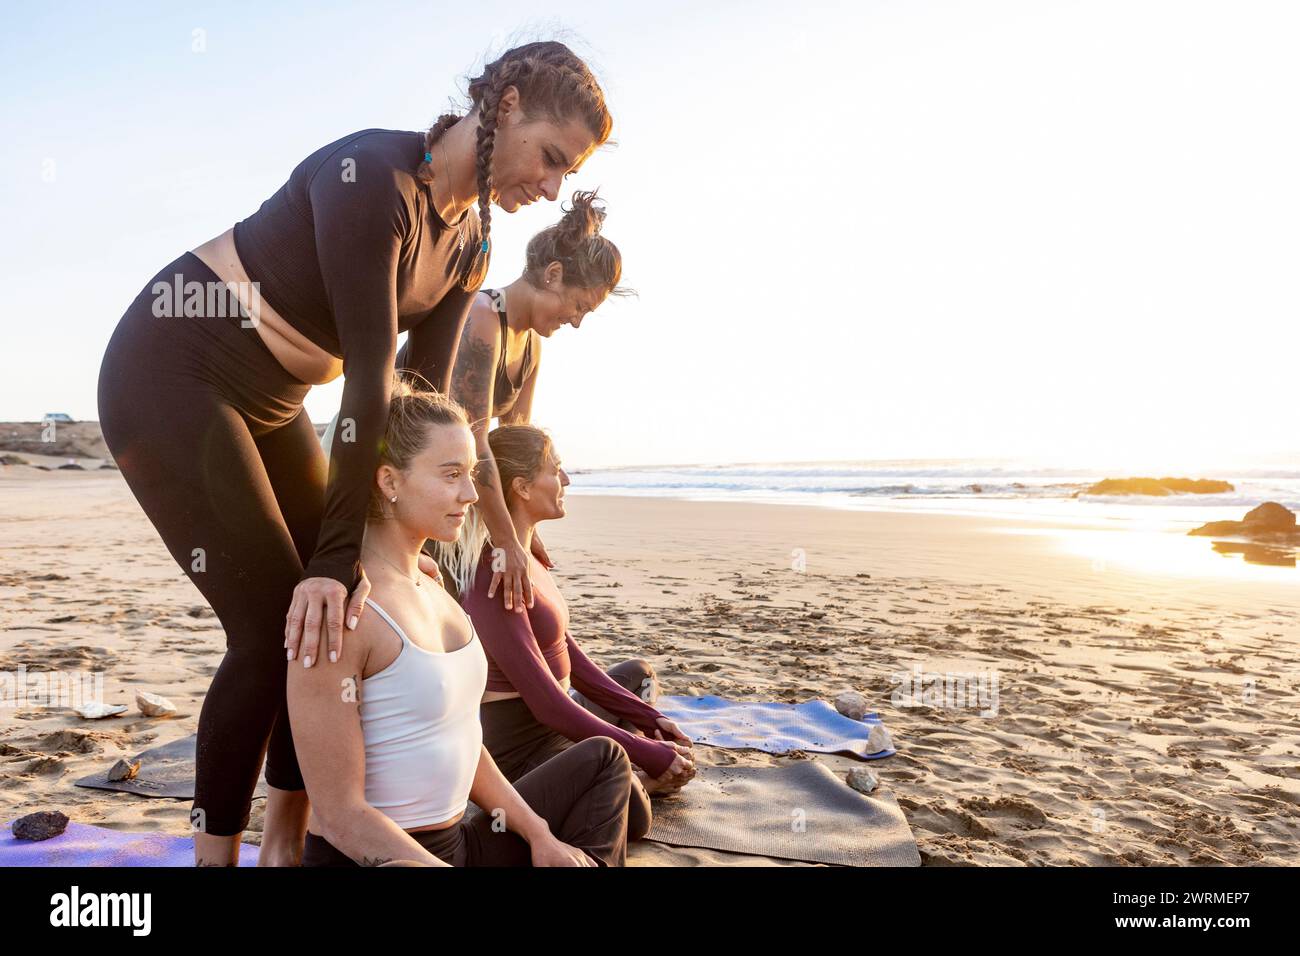 A serene yoga class unfolds on a sandy beach at sunset, with participants engaging in various poses under the guidance of an instructor. Stock Photo